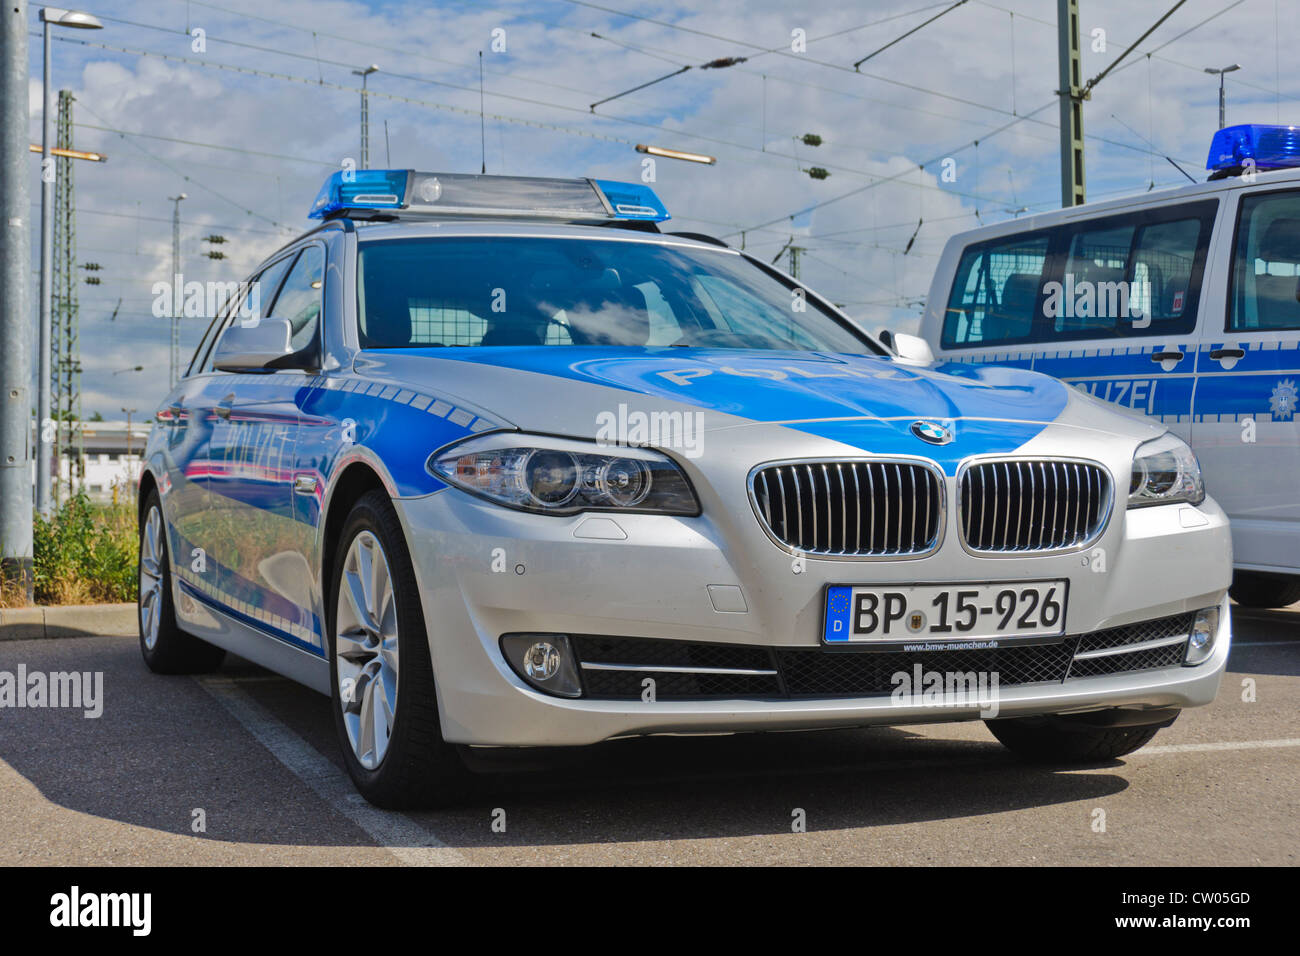 BMW and VW Volkswagen police patrol cars of the German Federal Police (Bundespolizei) - Heilbronn Germany Stock Photo